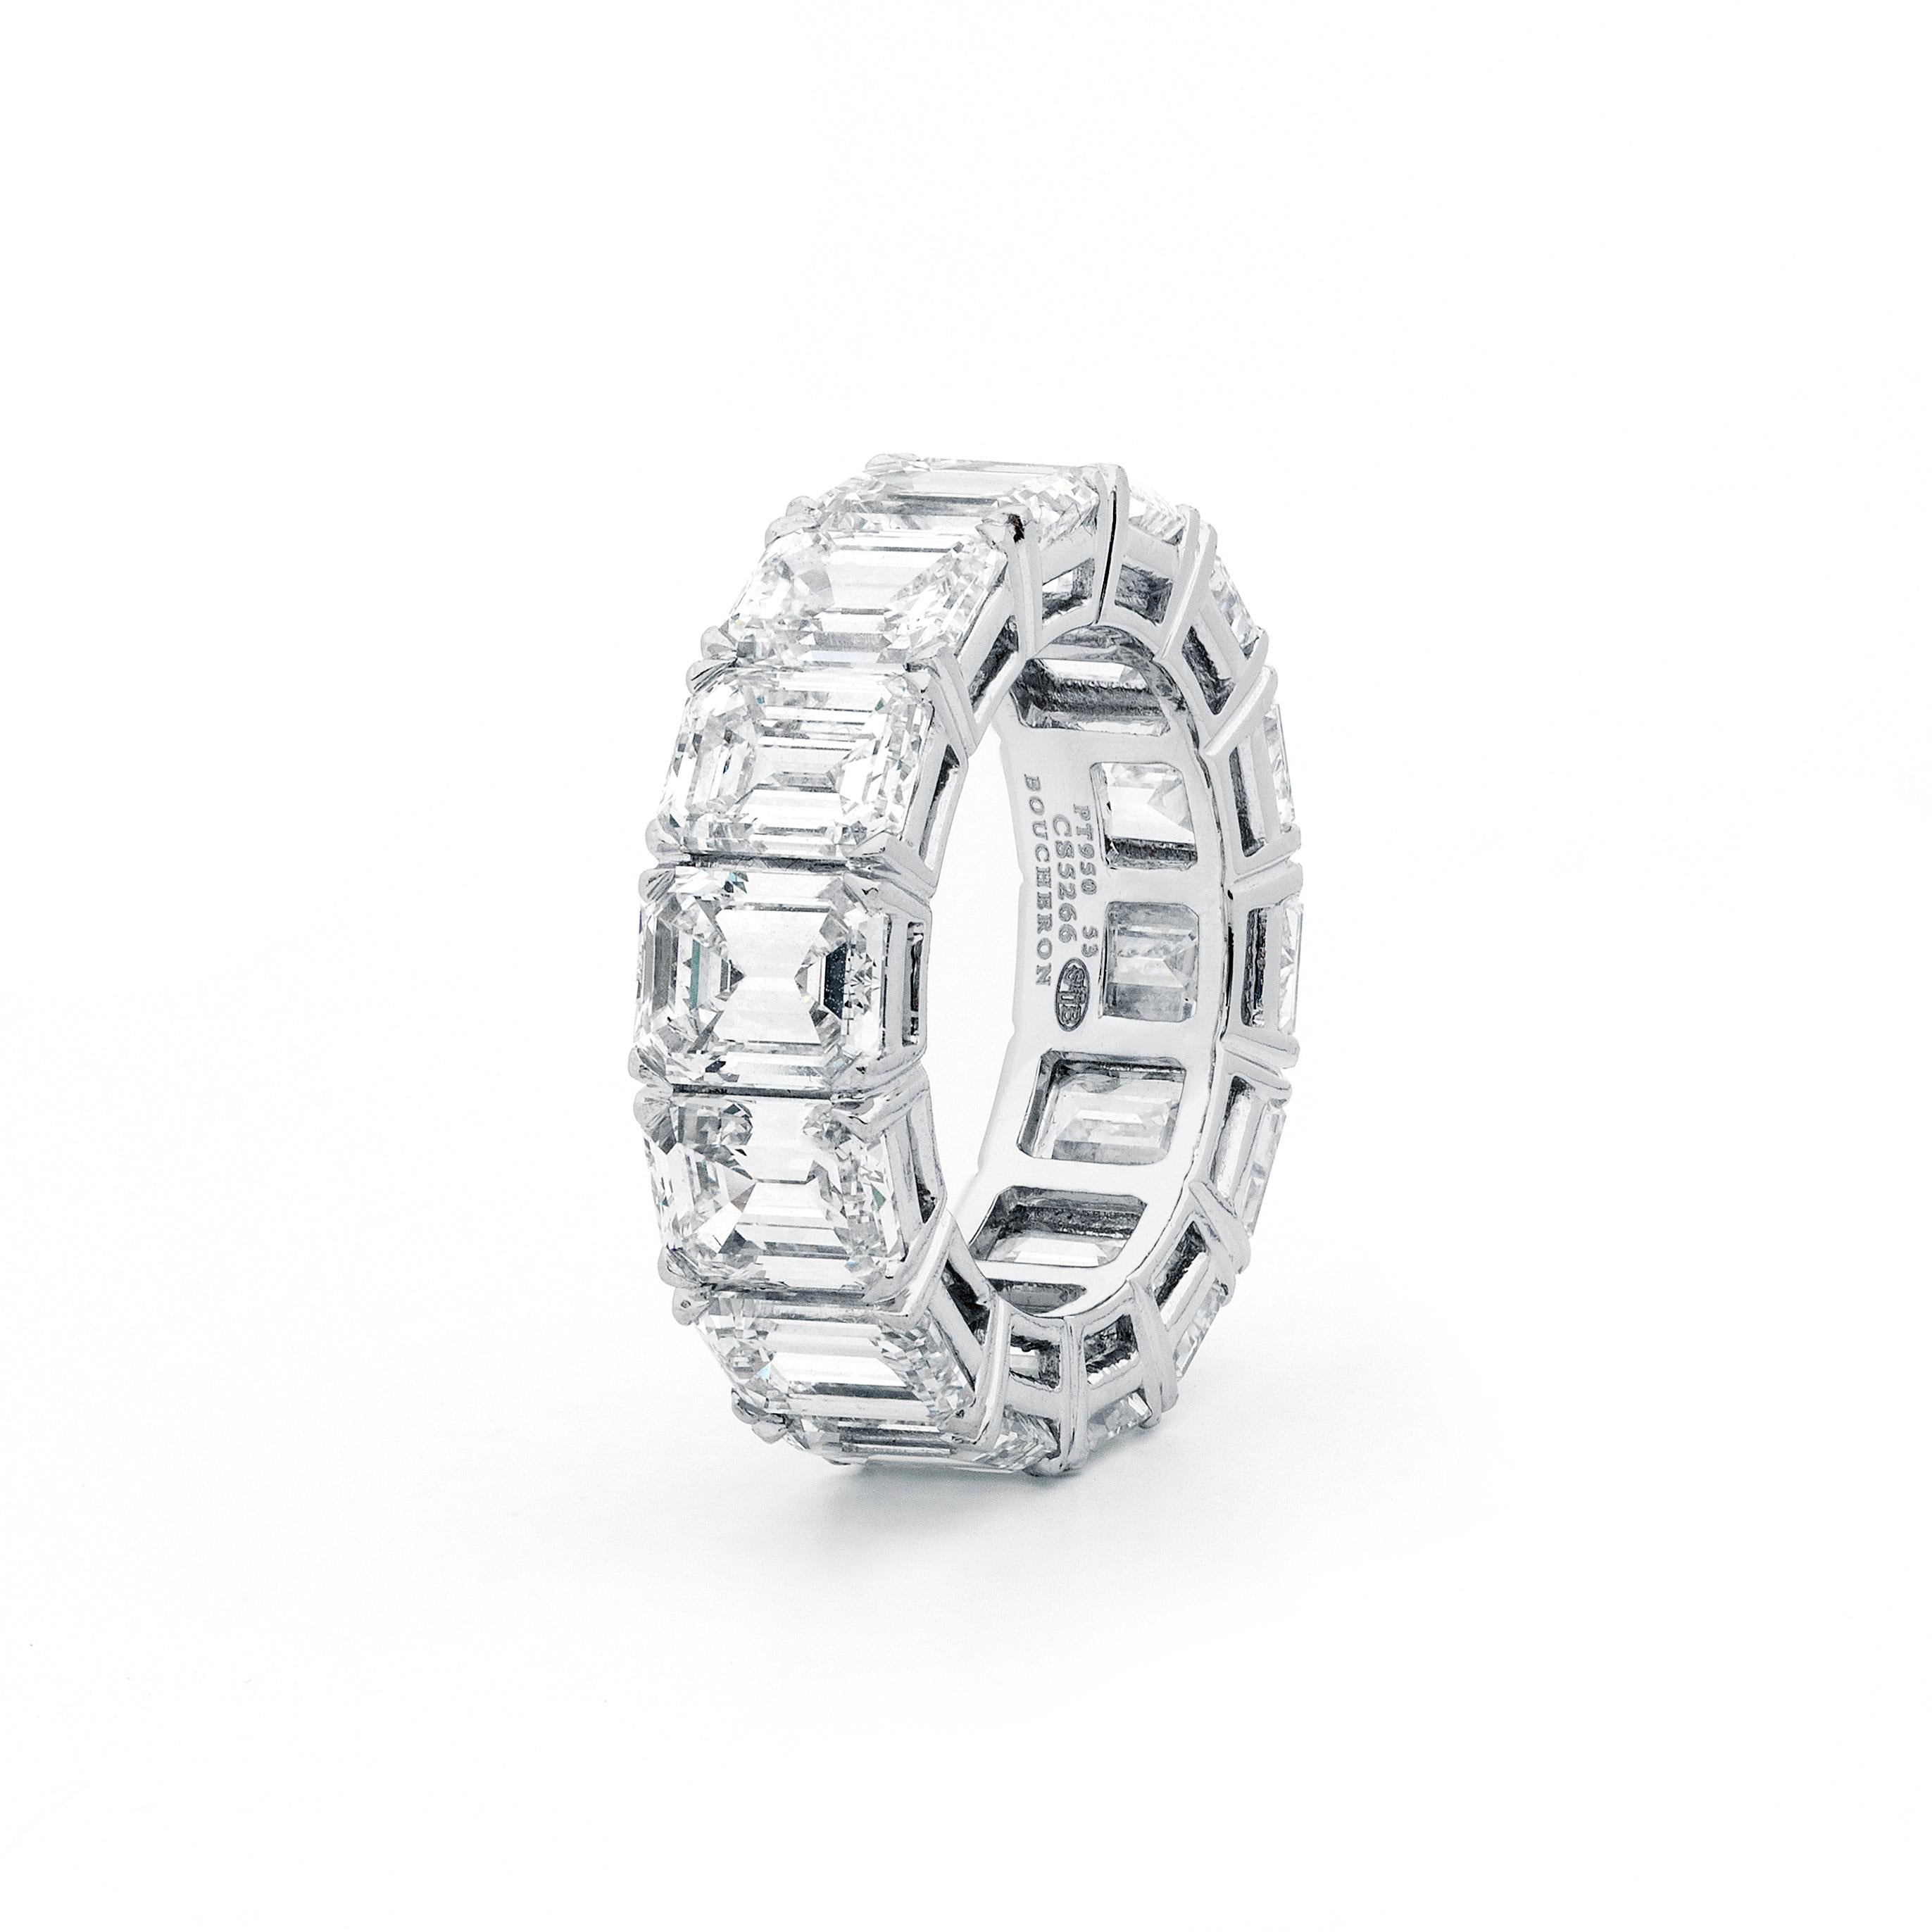 Eternity rings have been around for centuries, ever since the Egyptians designed them to symbolize eternal love and the circle of life. This Boucheron pre-owned ring has a clean and simple design exuding the brand's traditional craftsmanship and